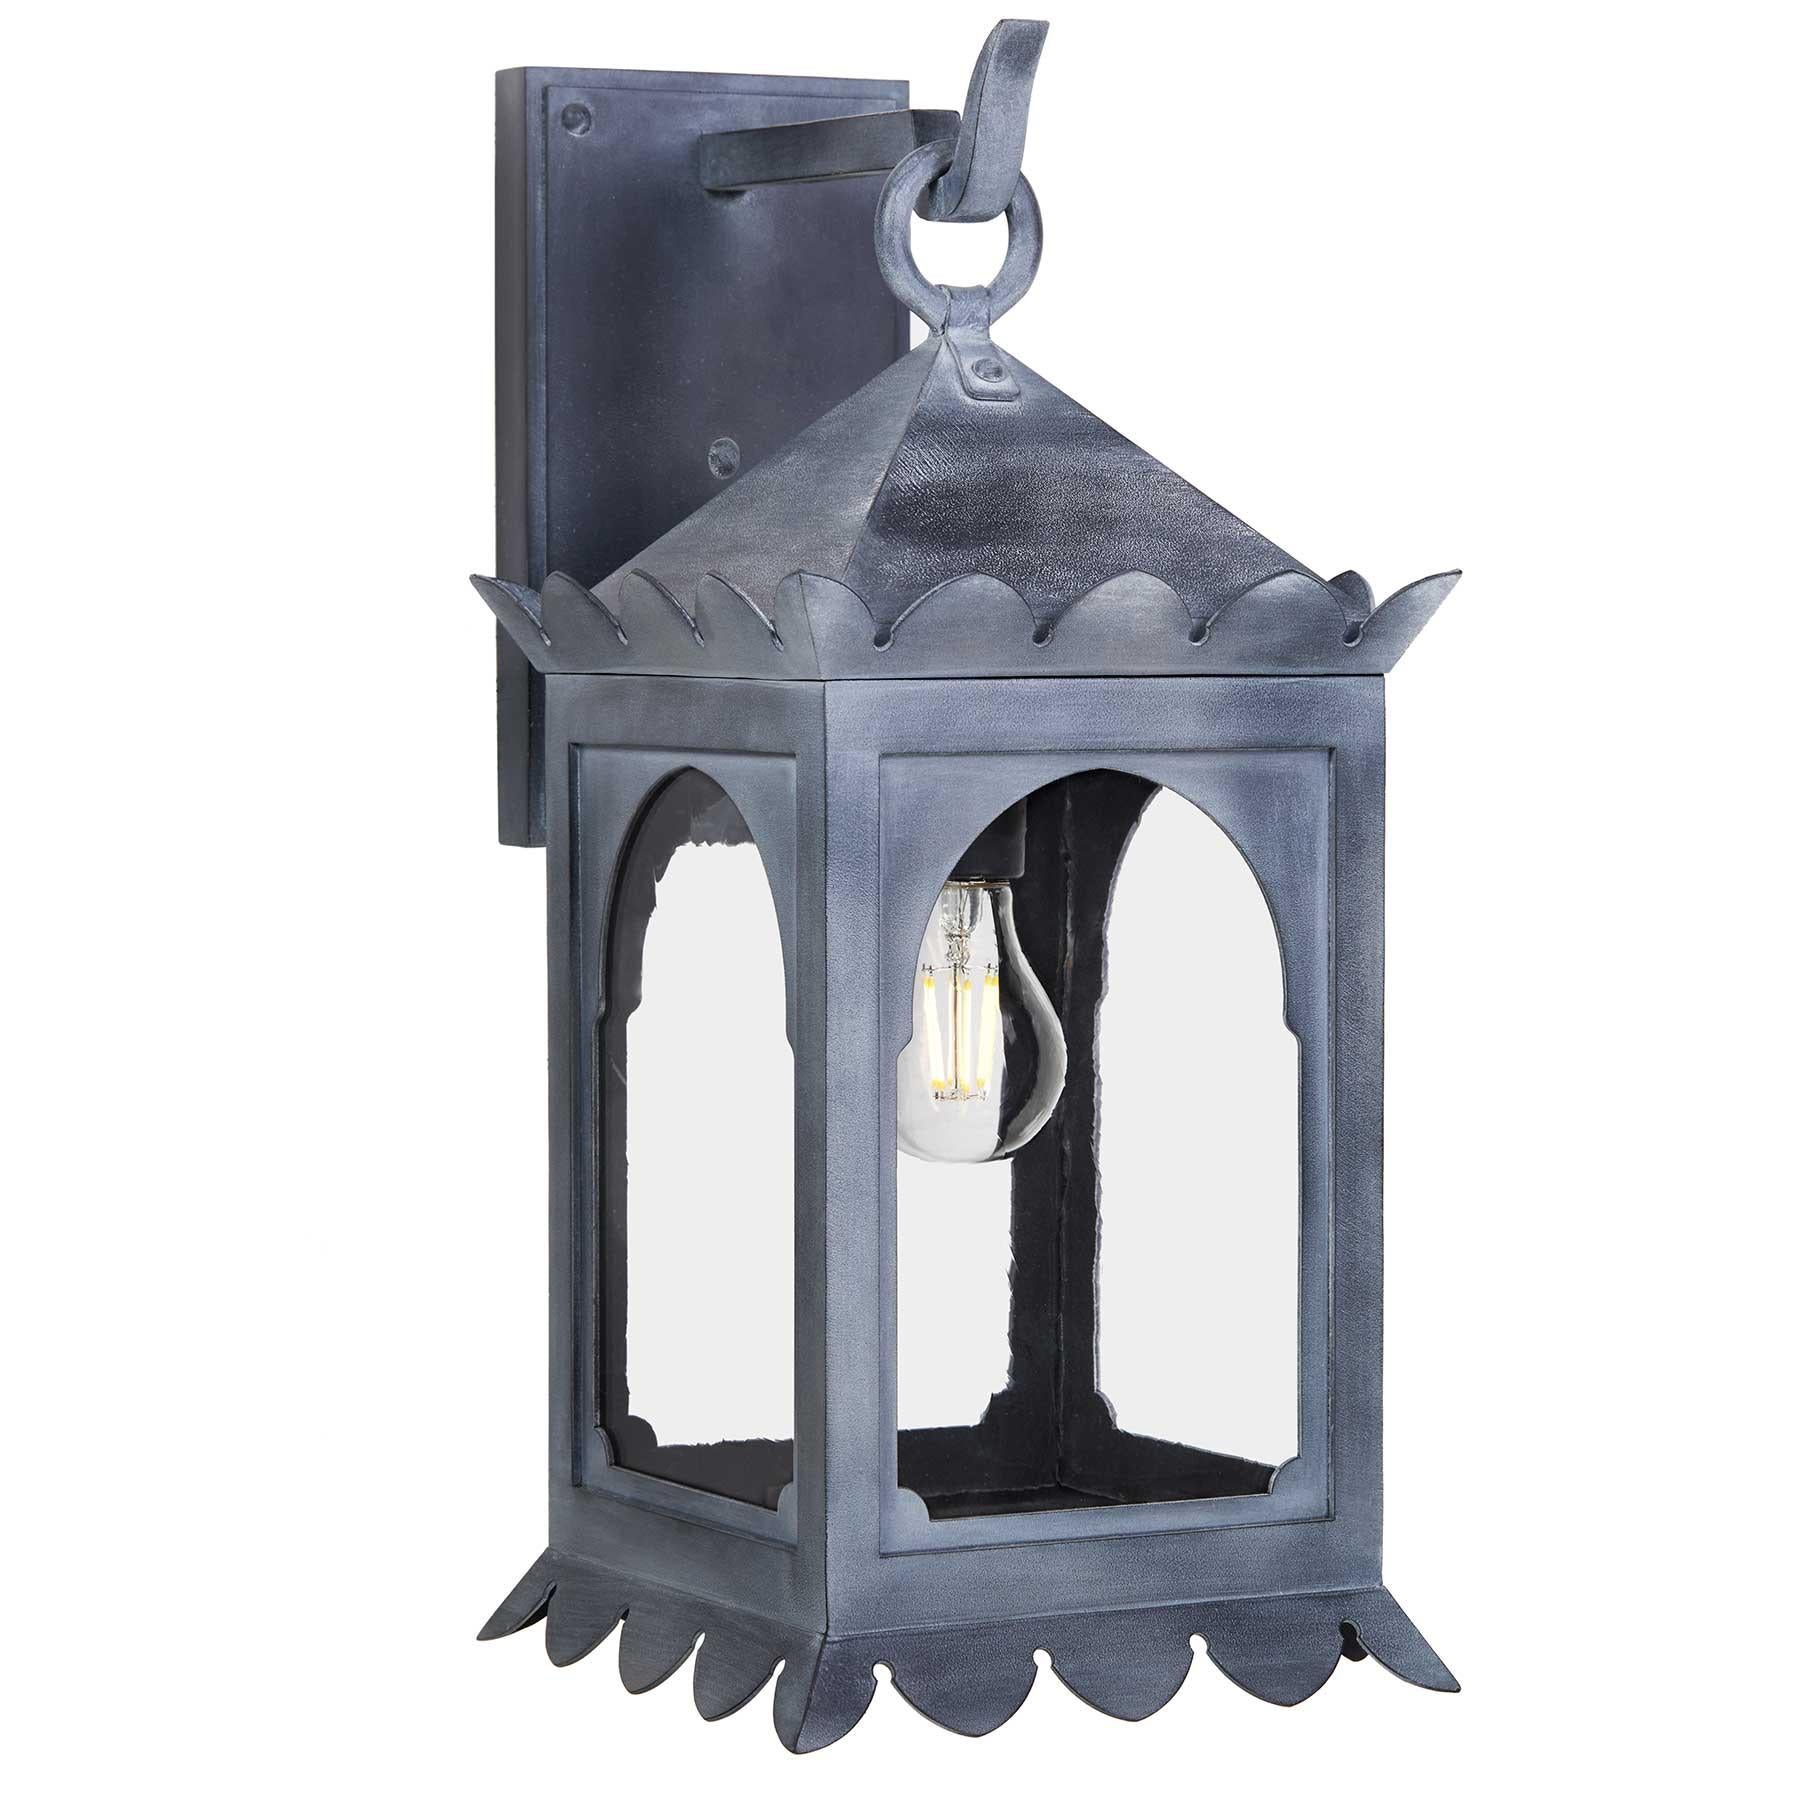 The Zara is a Moorish style exterior light fixture designed to add a touch of exotic elegance to your space. Crafted from heavy gauge steel, this fixture is built to last and radiates a robust aura of strength and durability. The Zinc Finish and